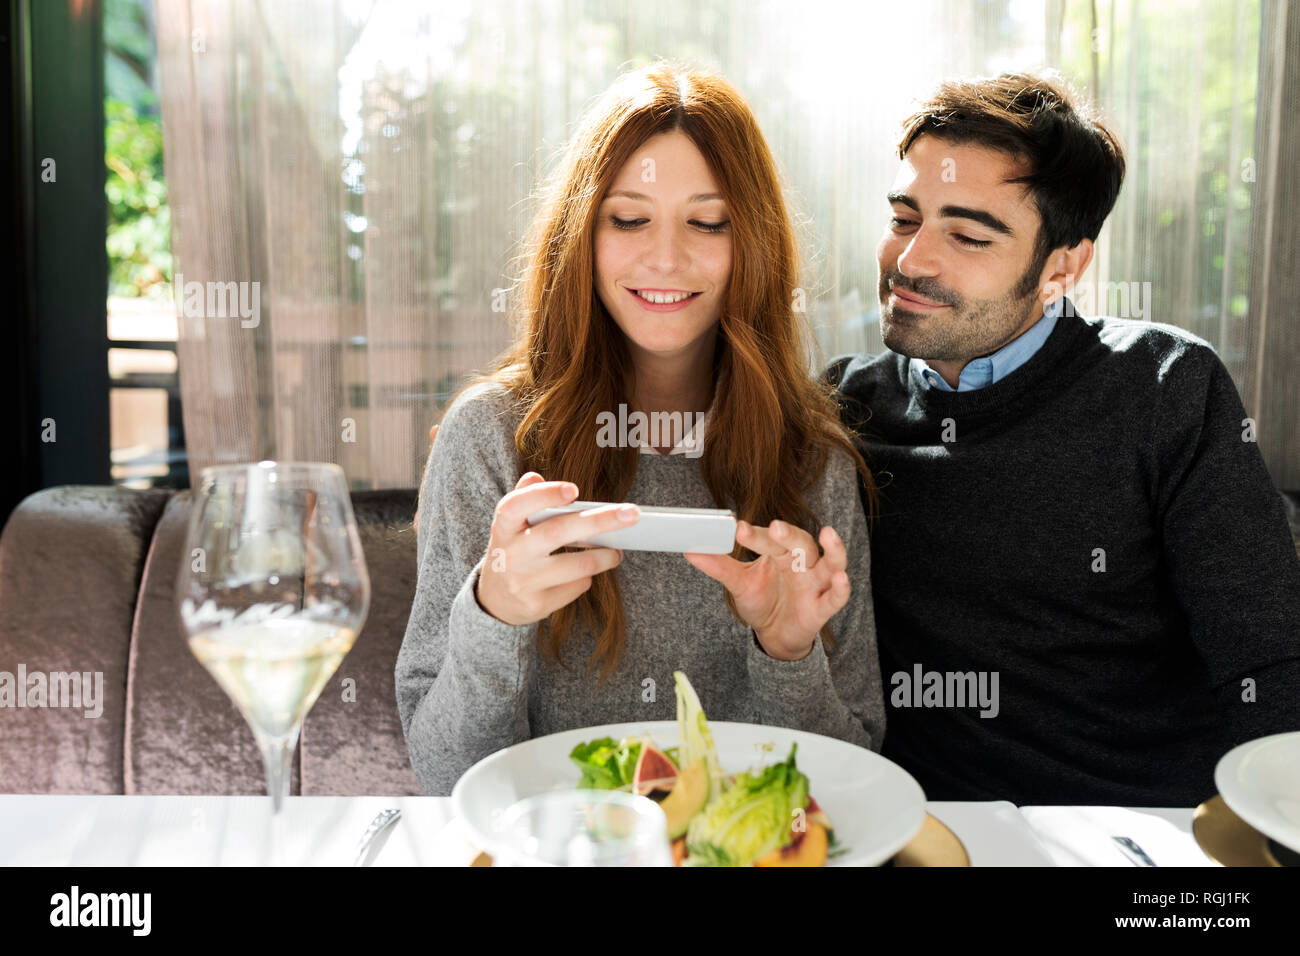 Smiling couple using cell phone in a restaurant Stock Photo